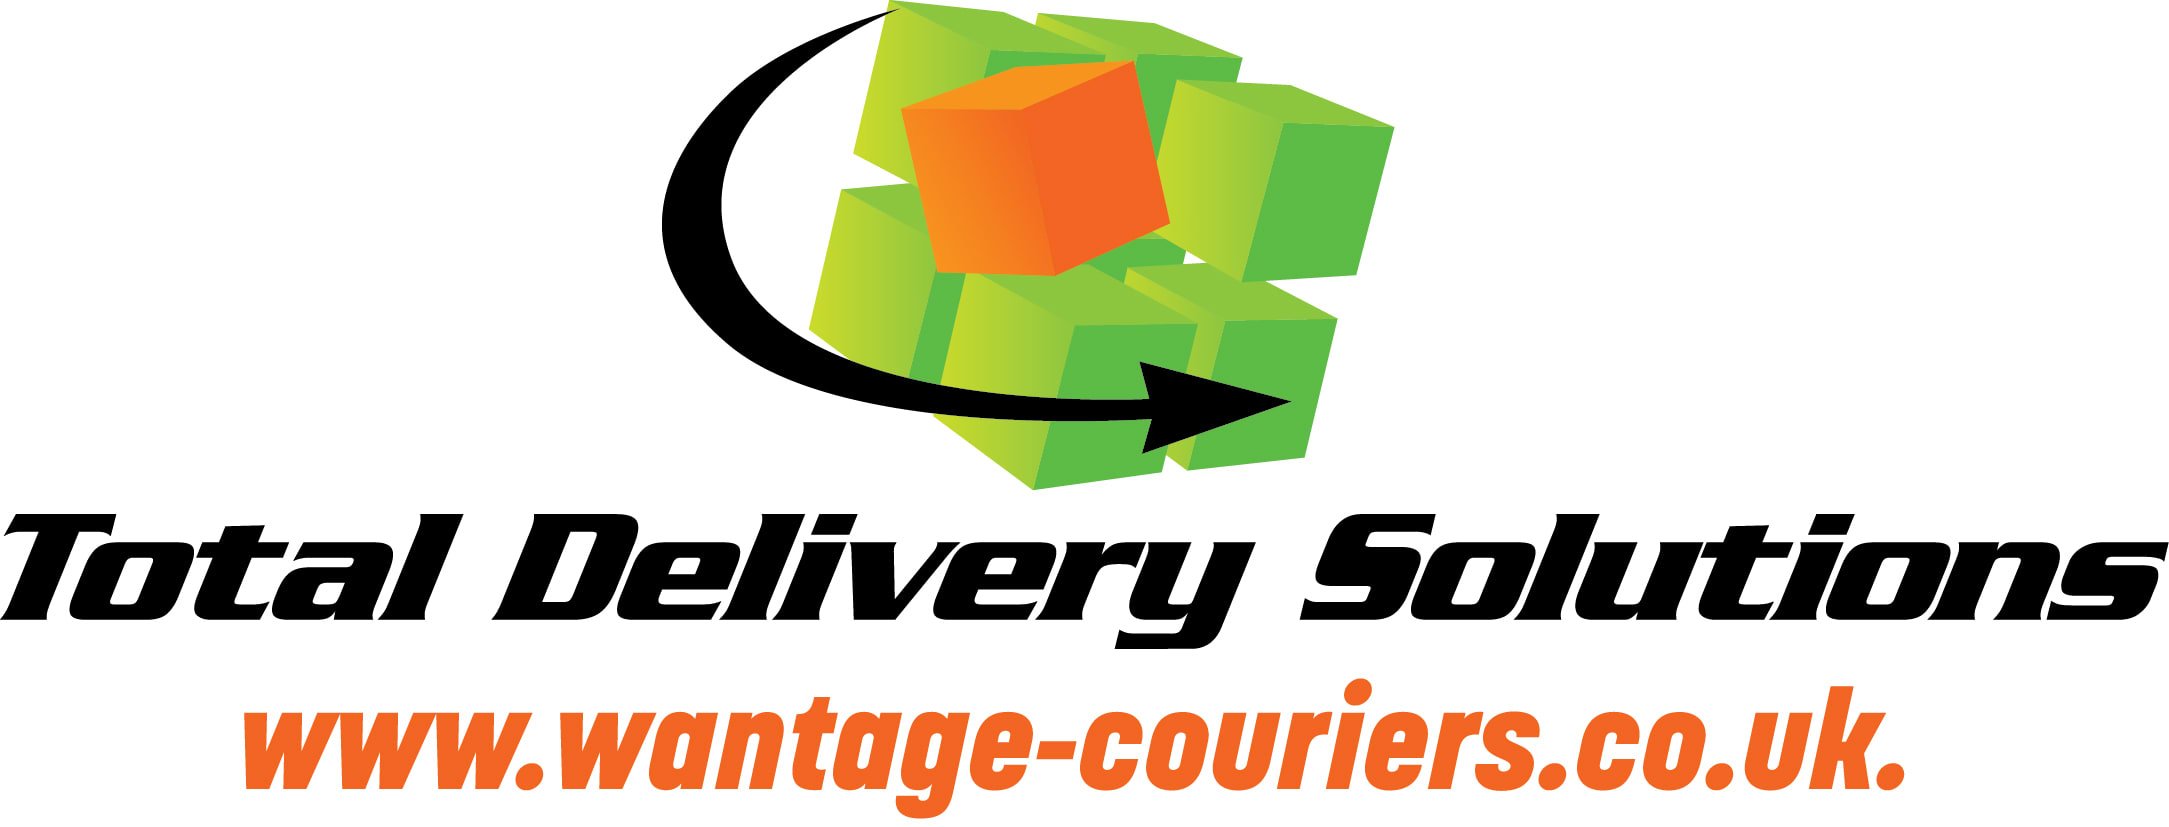 Wantage Couriers - TOTAL DELIVERY SOLUTIONS